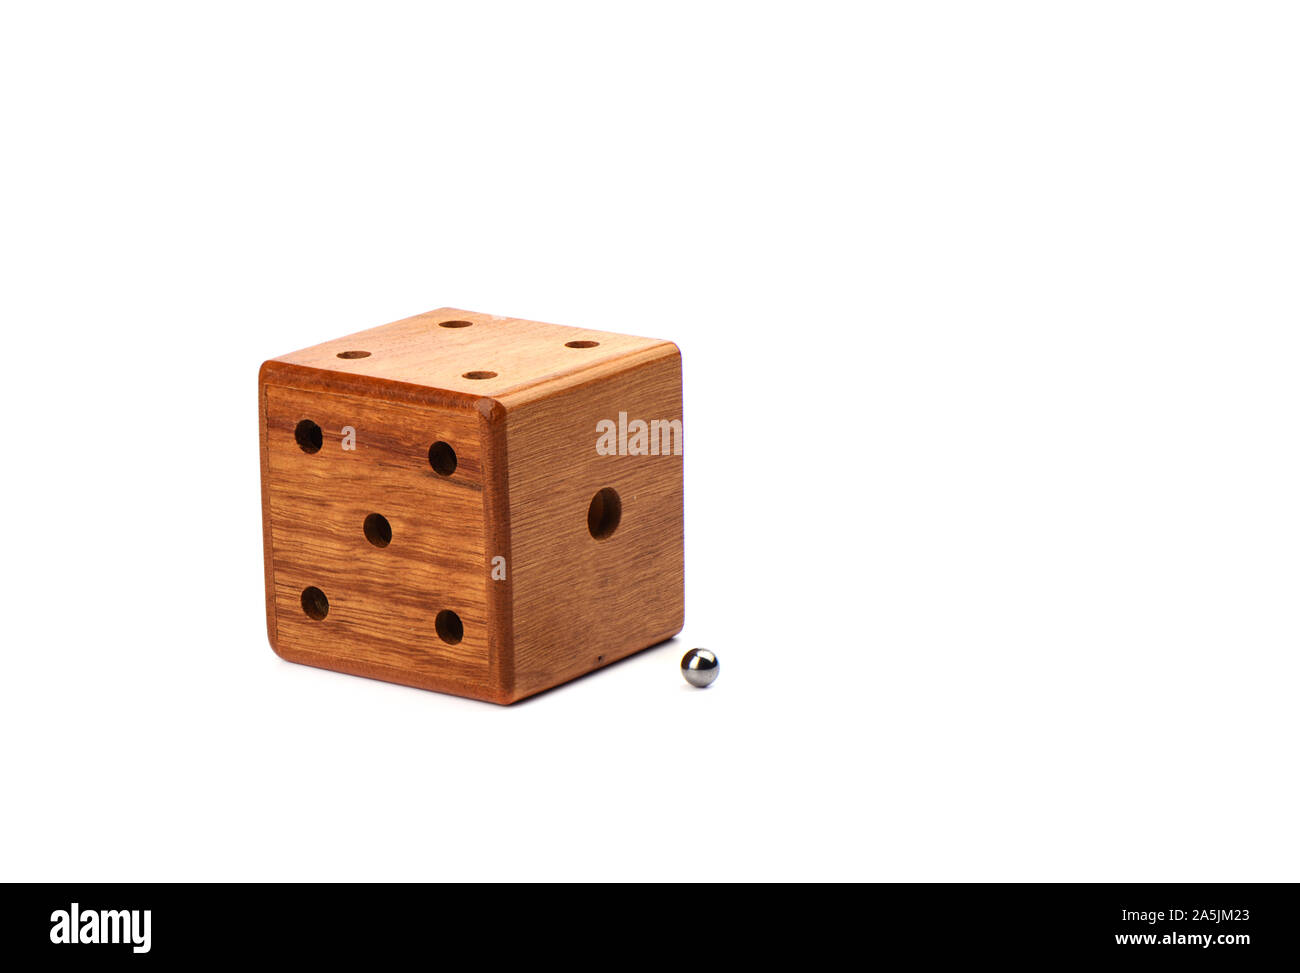 Puzzle magic cube three-dimensional maze. Wooden cube with a metal ball on a white background. Puzzle concept. Stock Photo